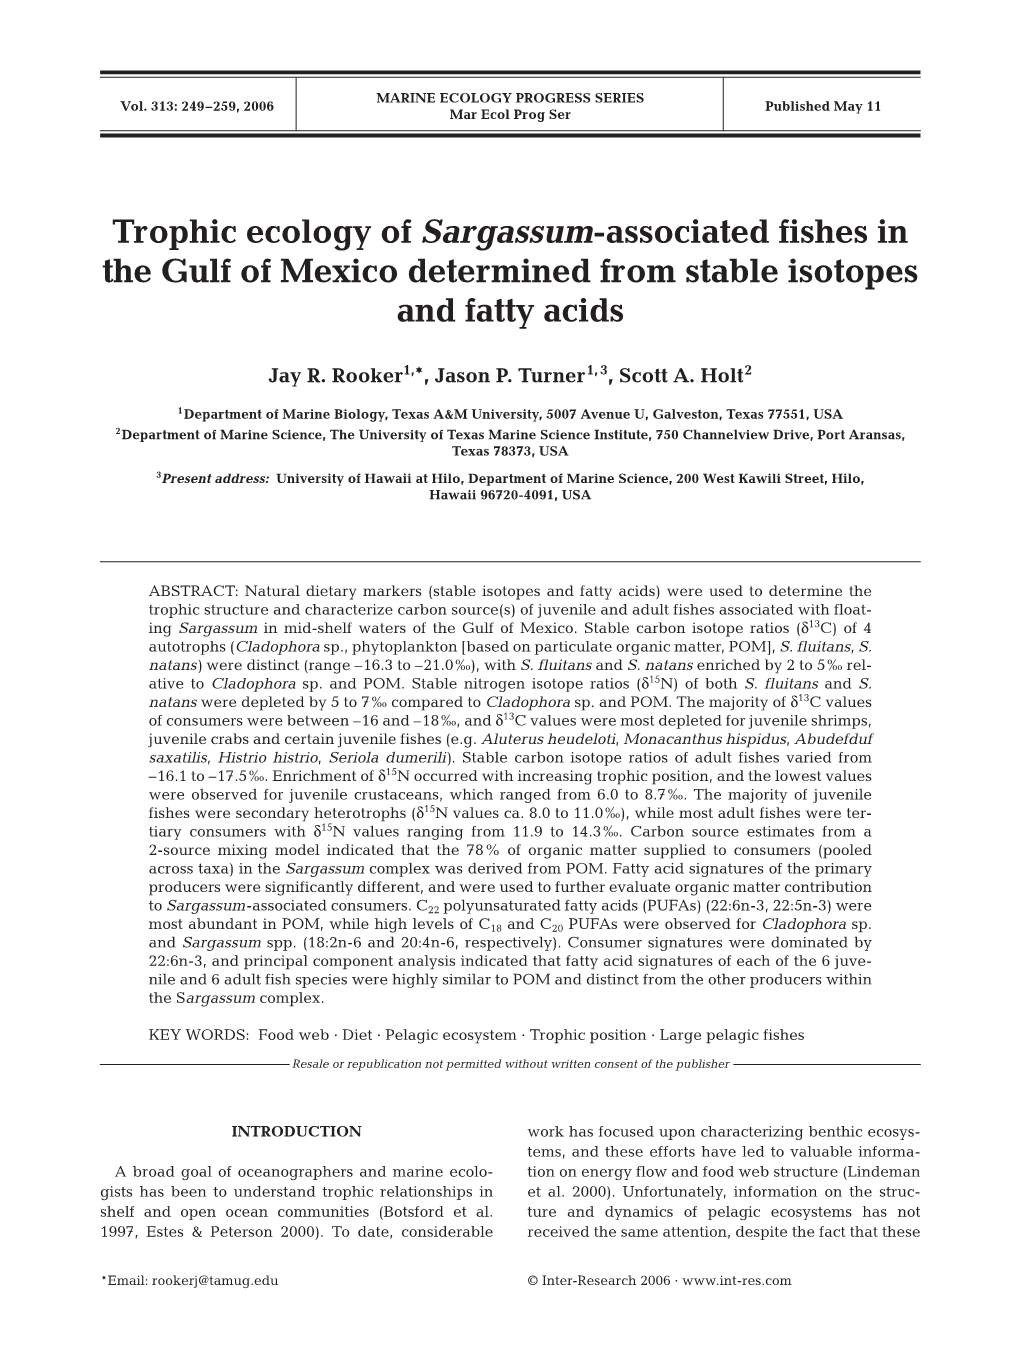 Trophic Ecology of Sargassum-Associated Fishes in the Gulf of Mexico Determined from Stable Isotopes and Fatty Acids